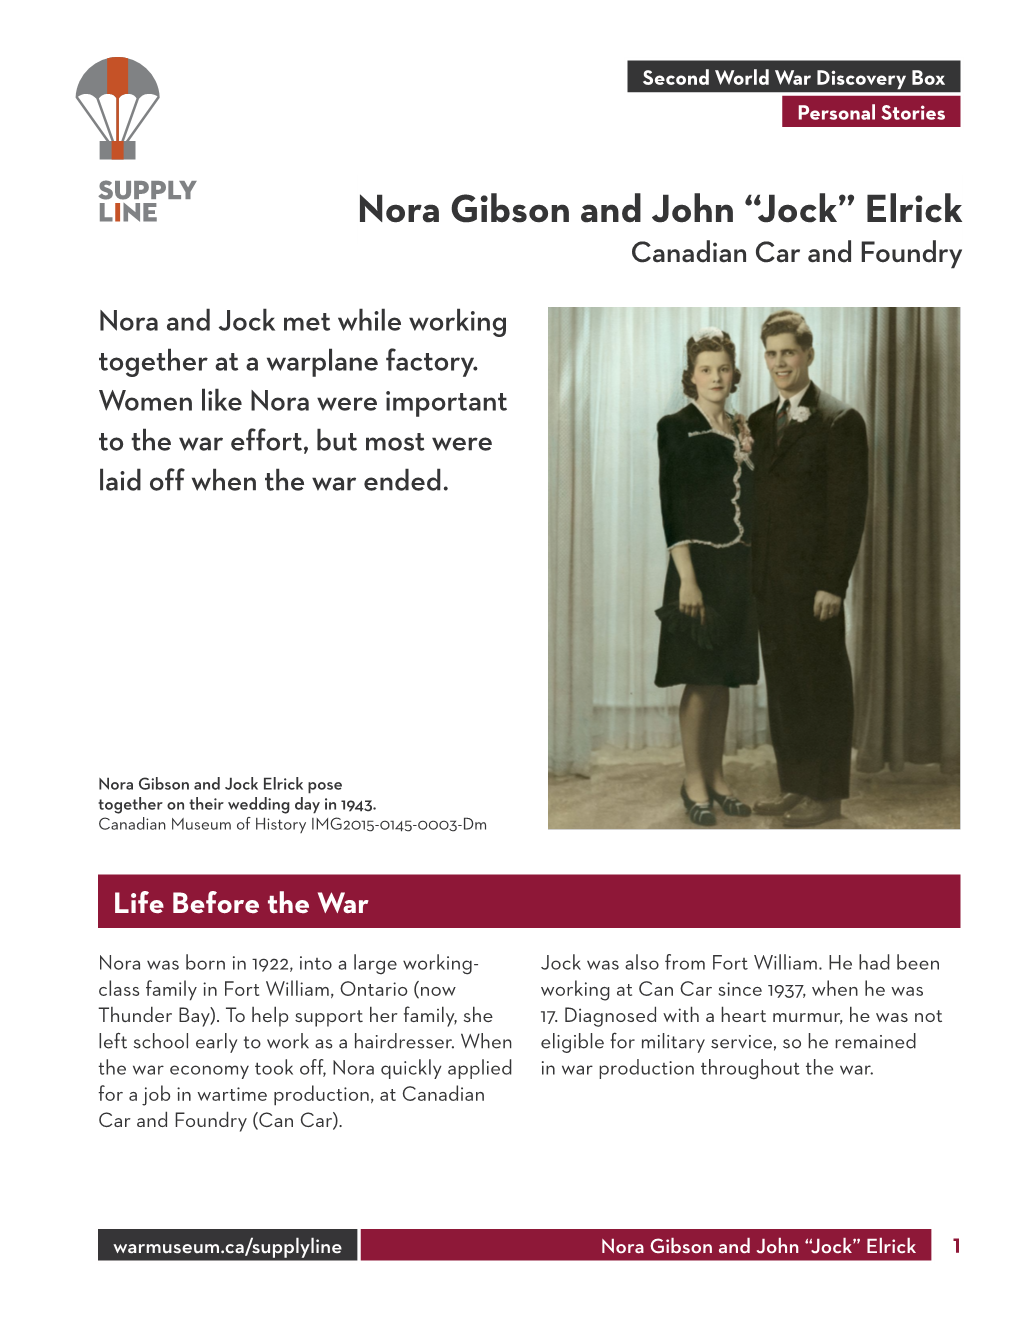 Nora Gibson and John “Jock” Elrick Canadian Car and Foundry